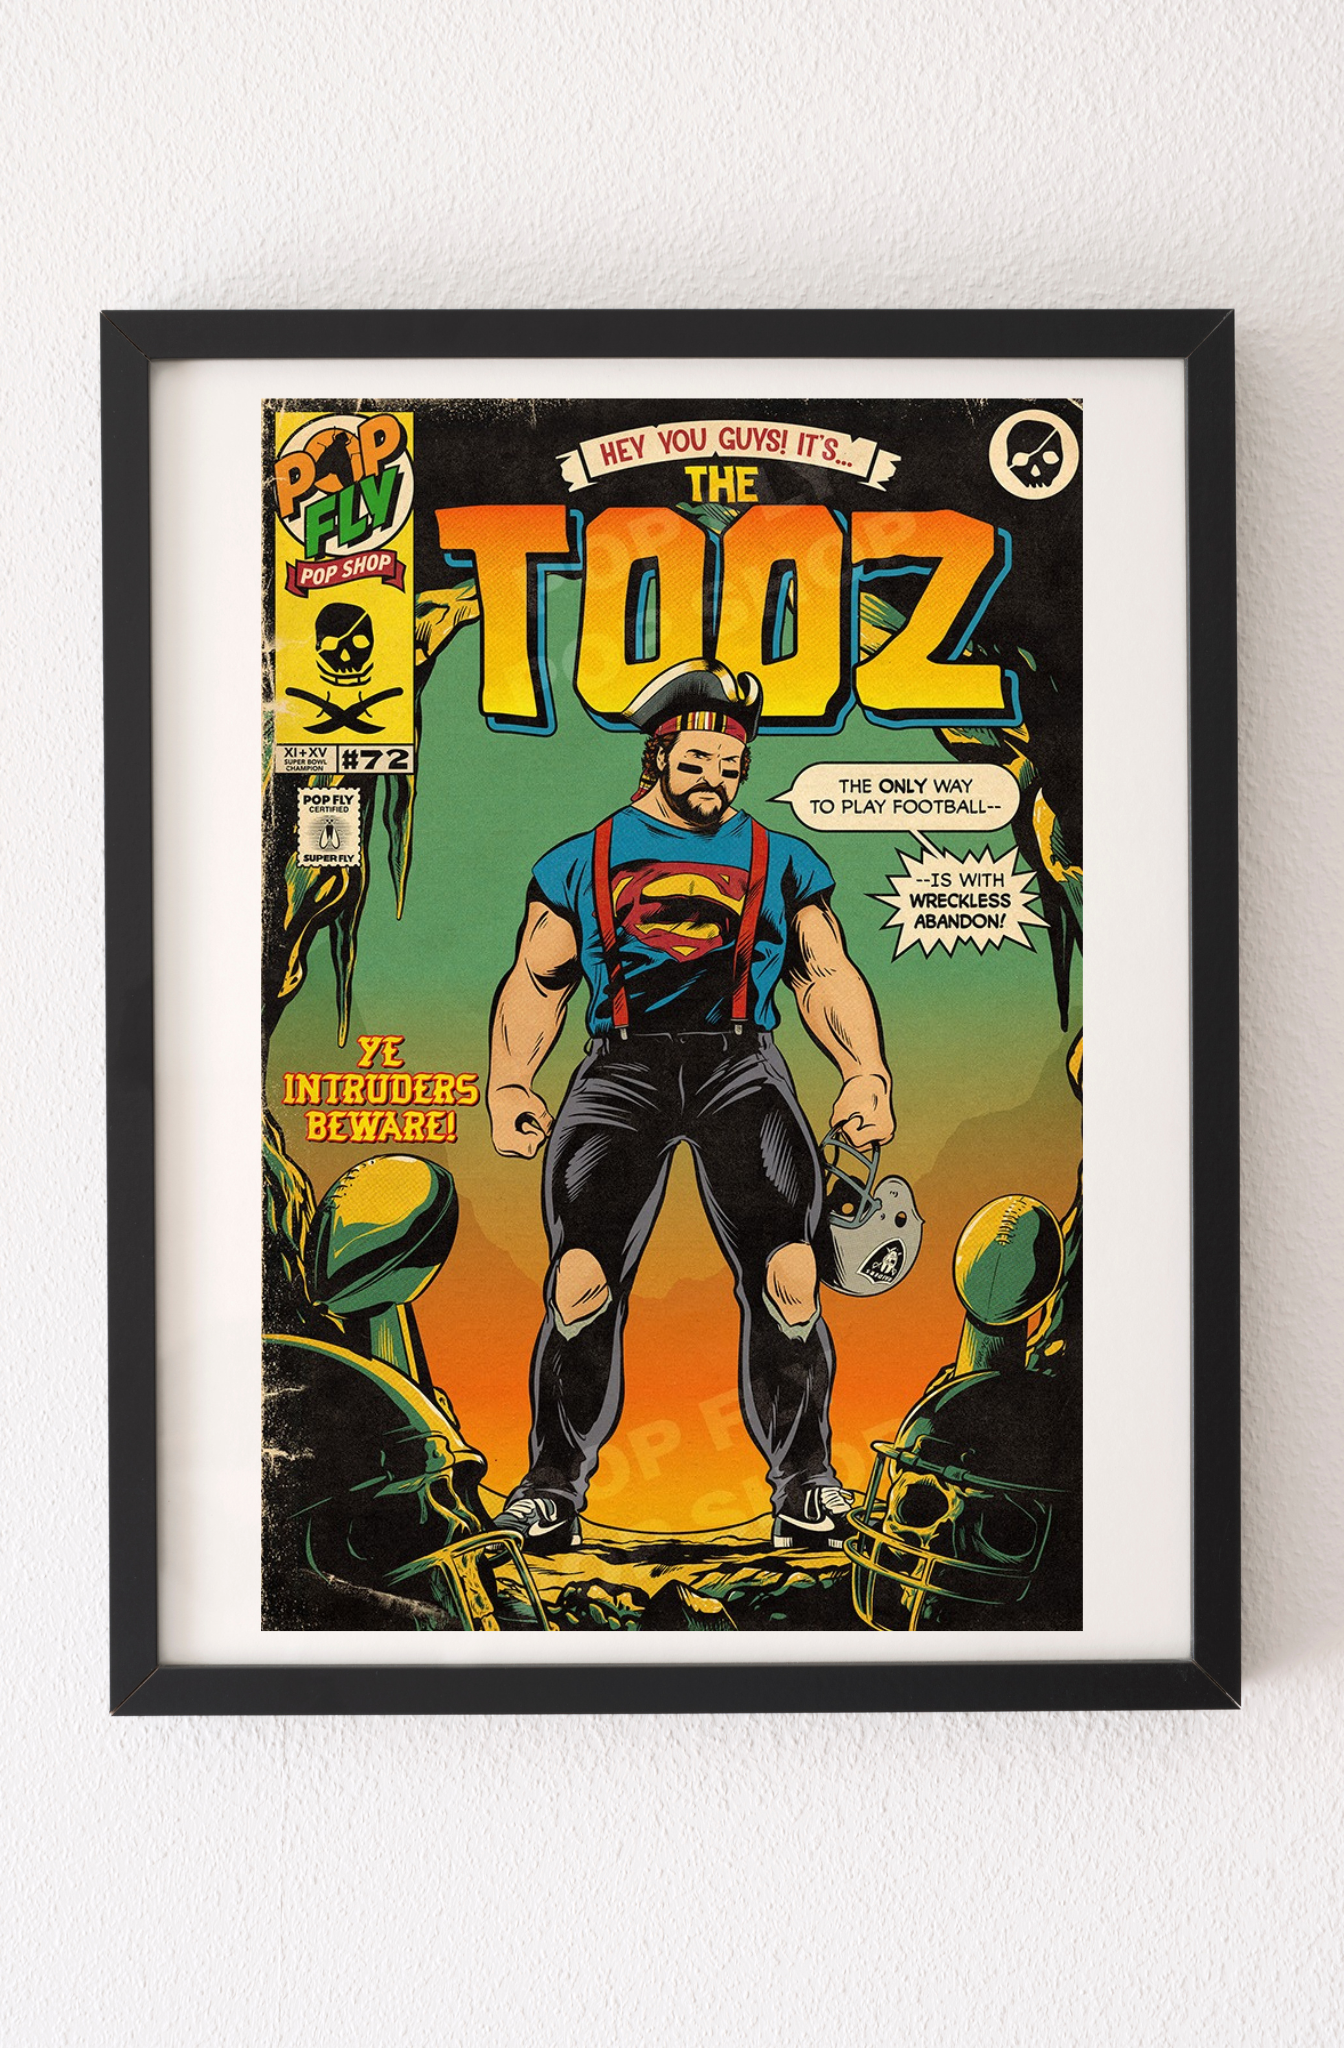 11. (SOLD OUT) "The Tooz" 7" x 10.5" Art Print